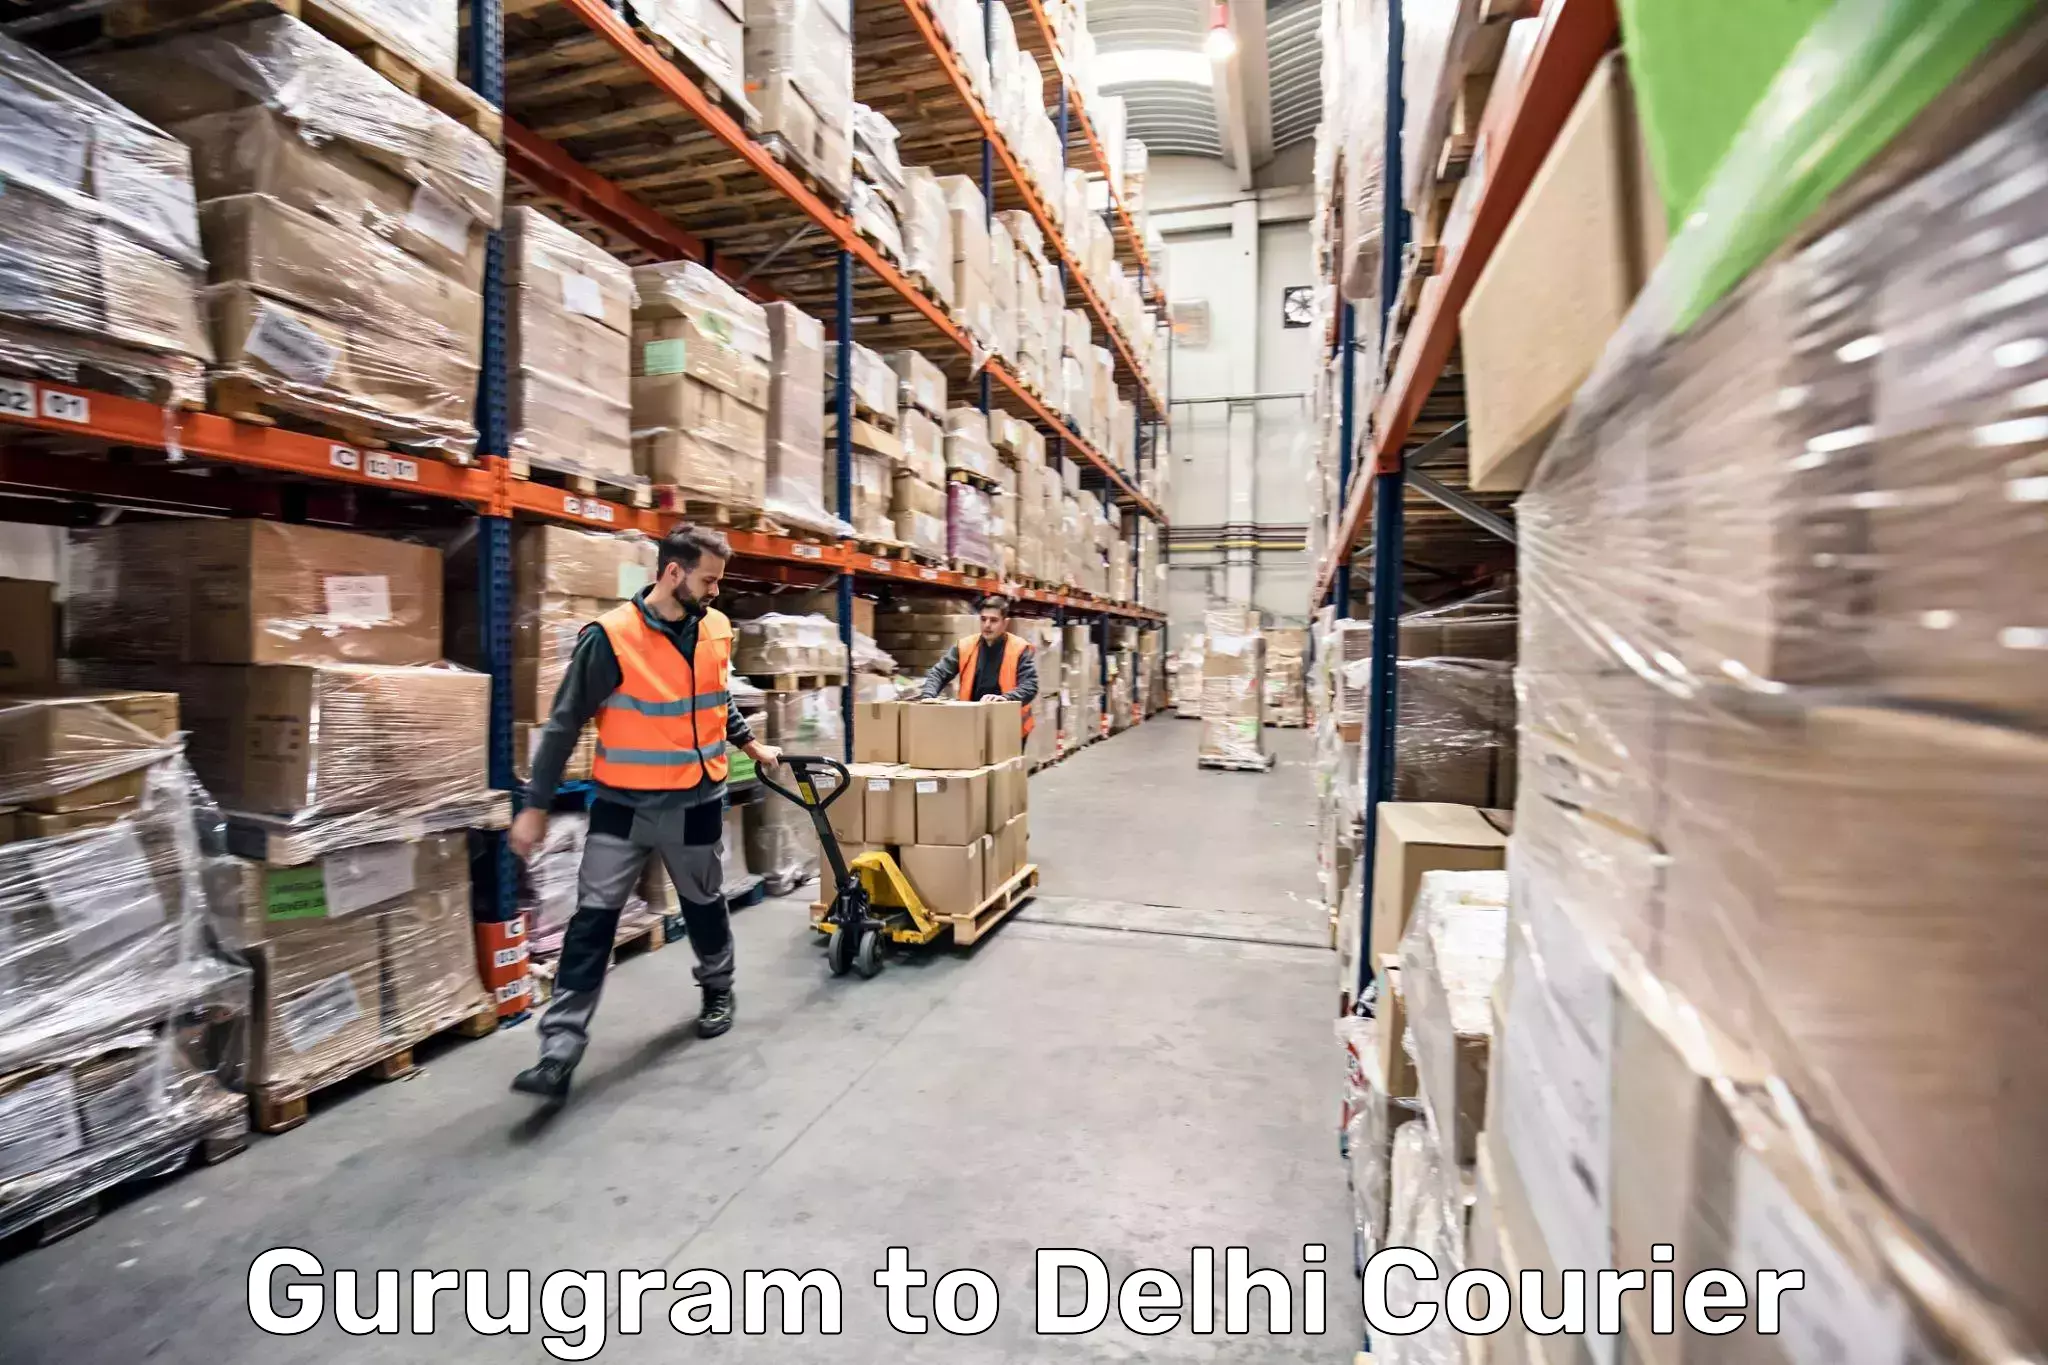 Luggage delivery app Gurugram to Lodhi Road